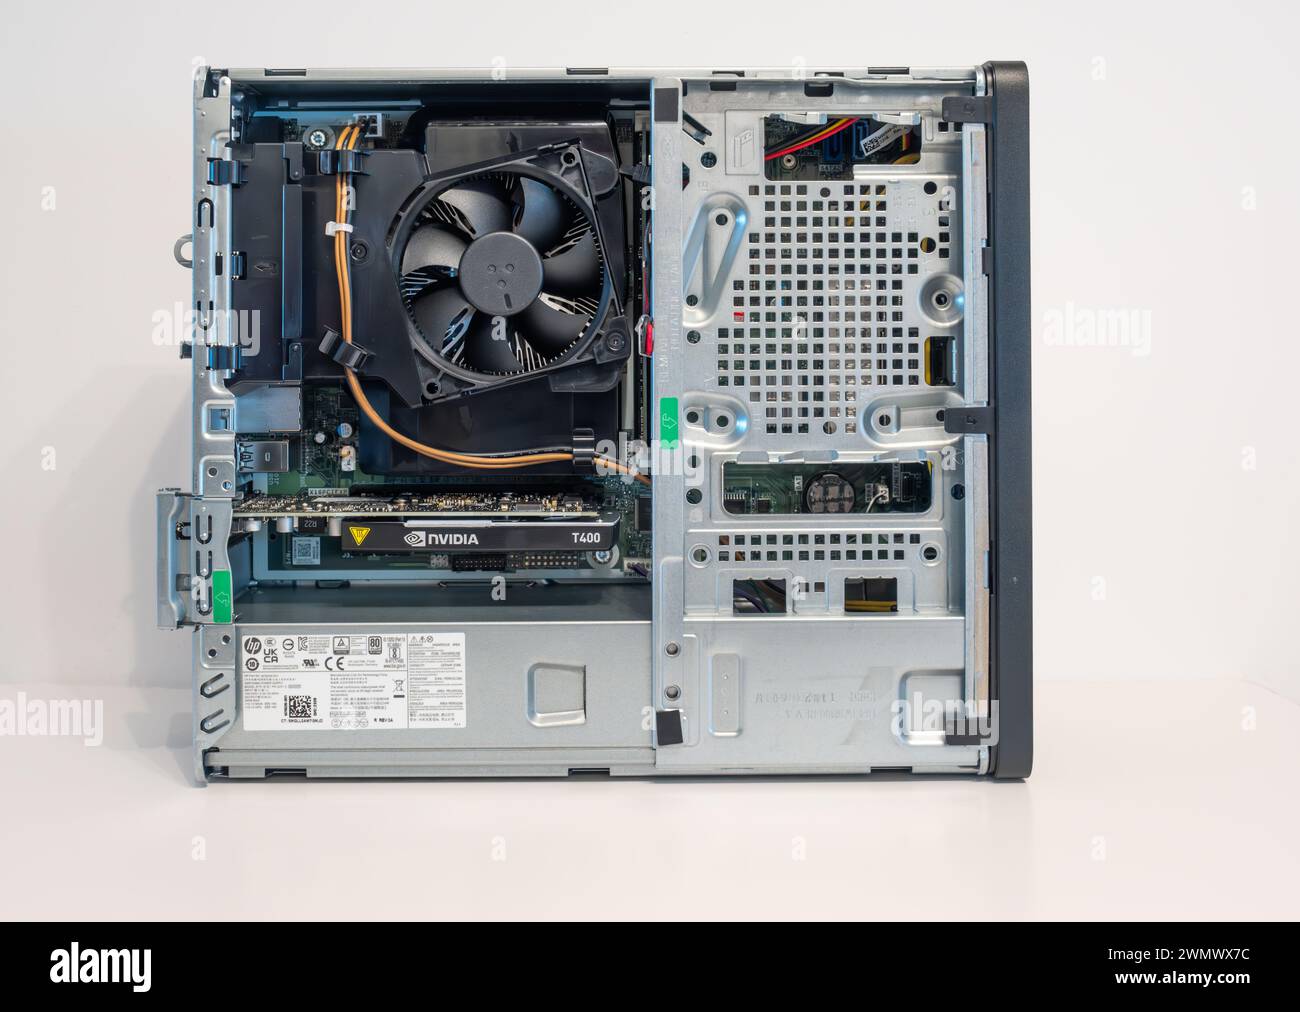 Nvidia T400 graphics card in a HP desktop PC Stock Photo